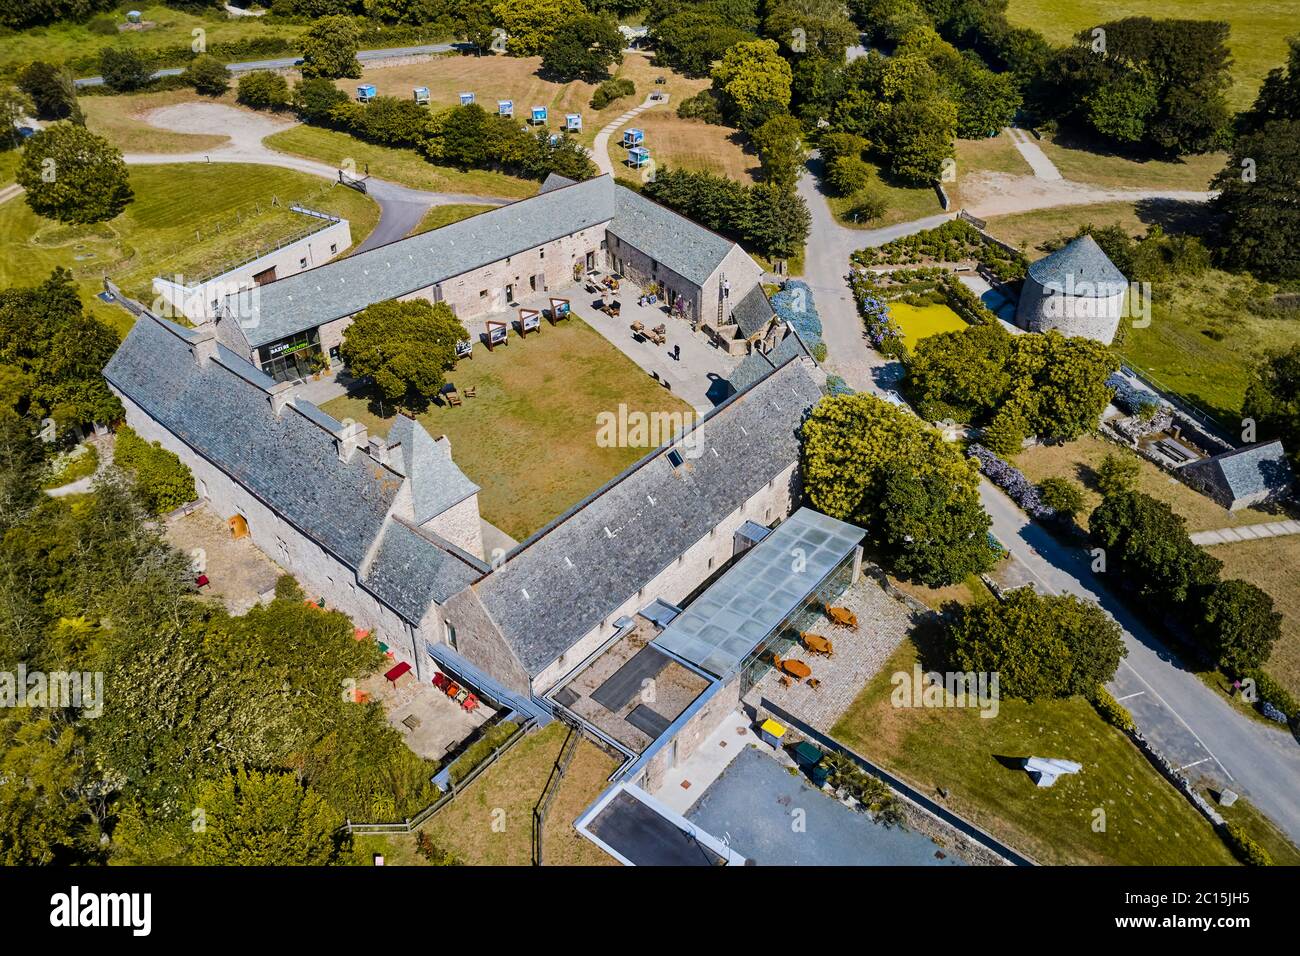 France, Normandy, Manche department, Cotentin, Omonville-la-Rogue, the 16th century Manor of Tourp is a cultural space dedicated to promoting the terr Stock Photo